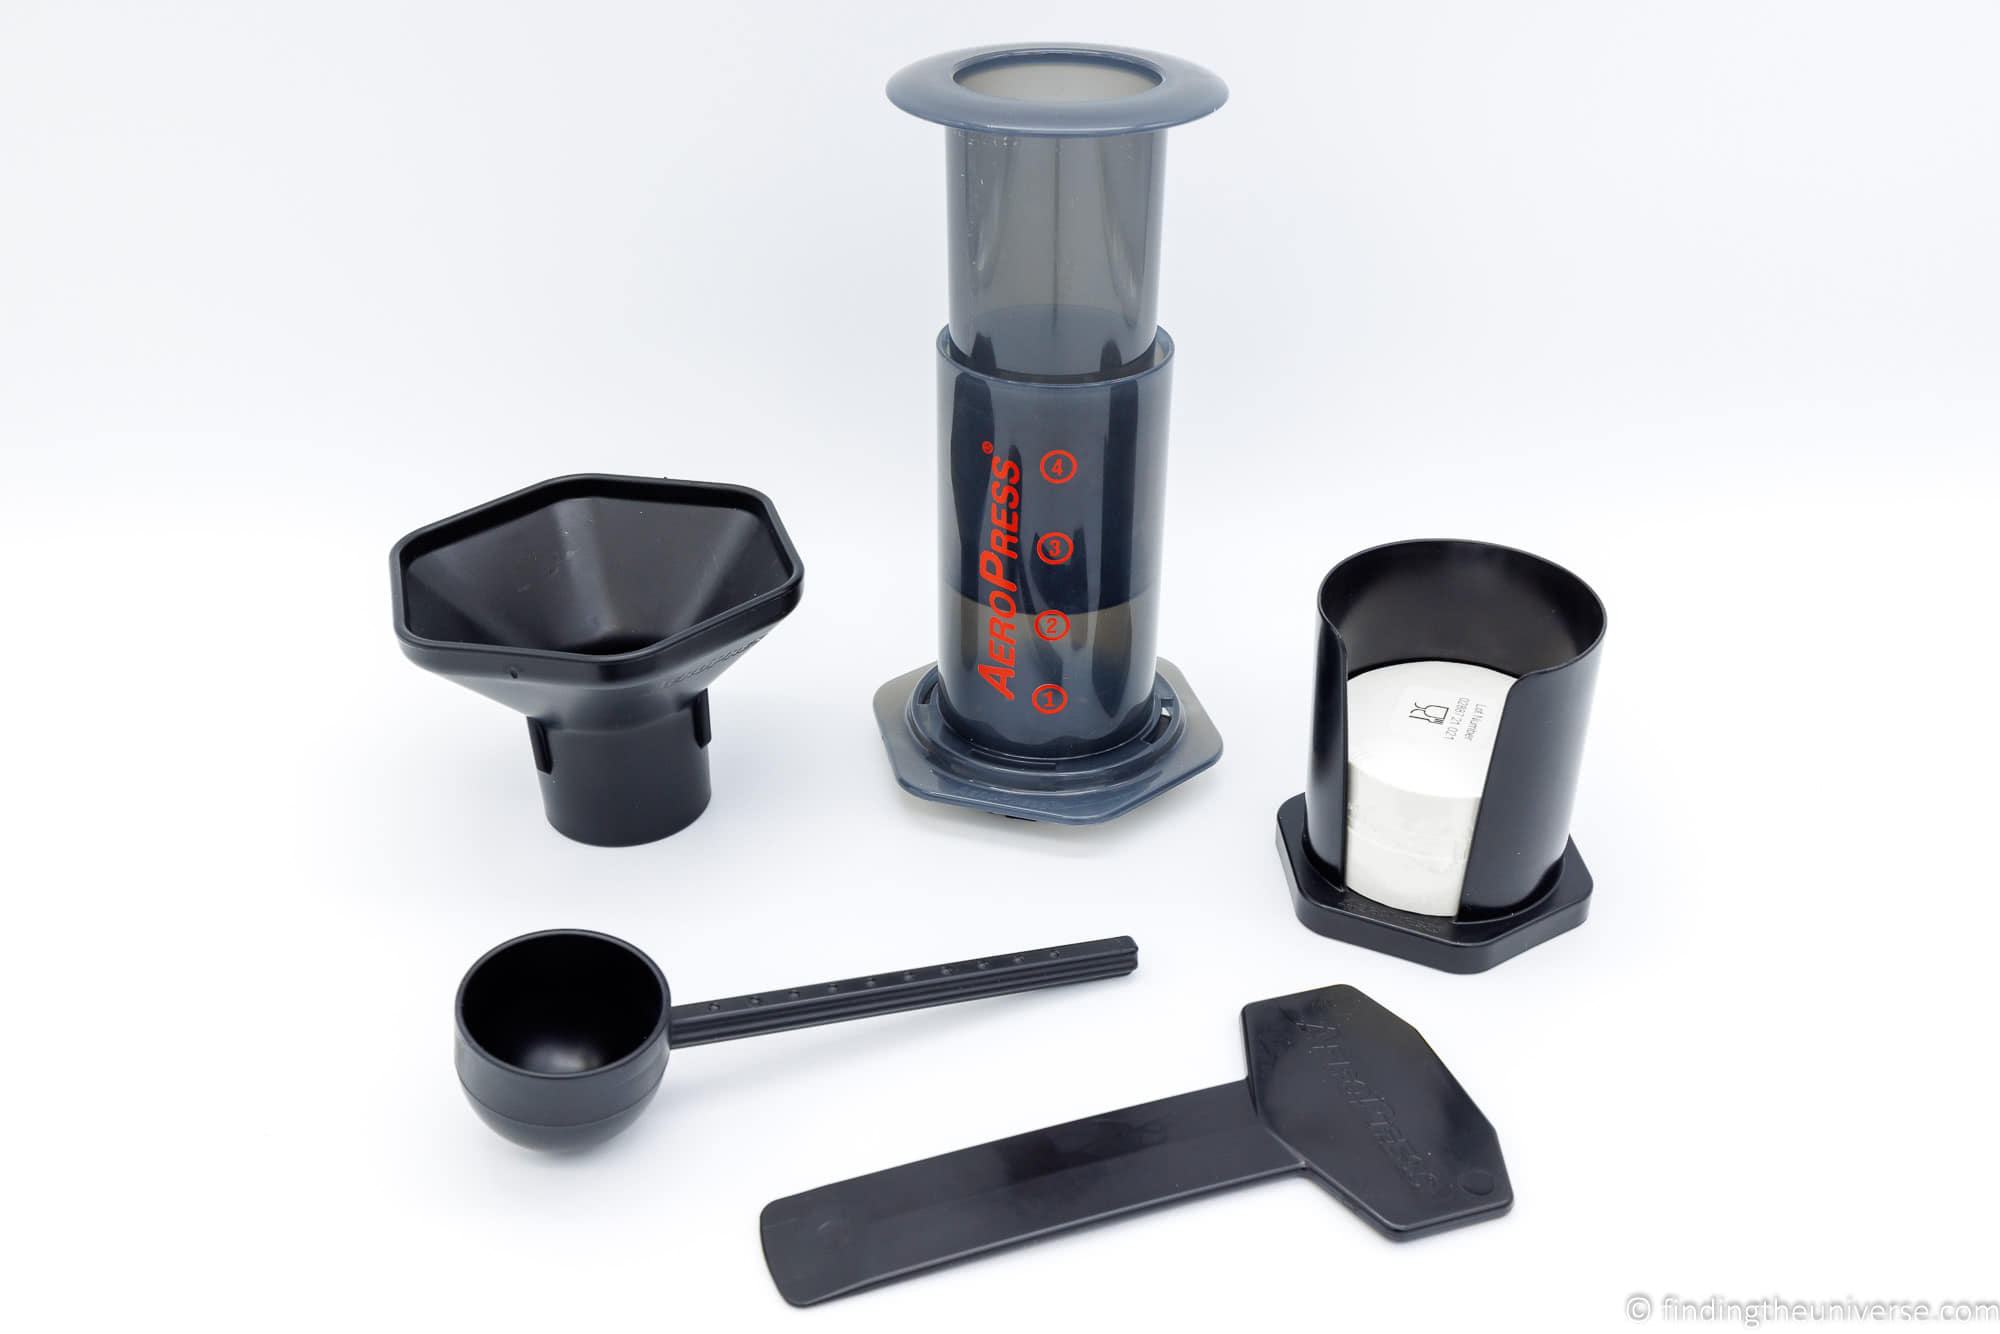 AeroPress Original and Accessories_by_Laurence Norah